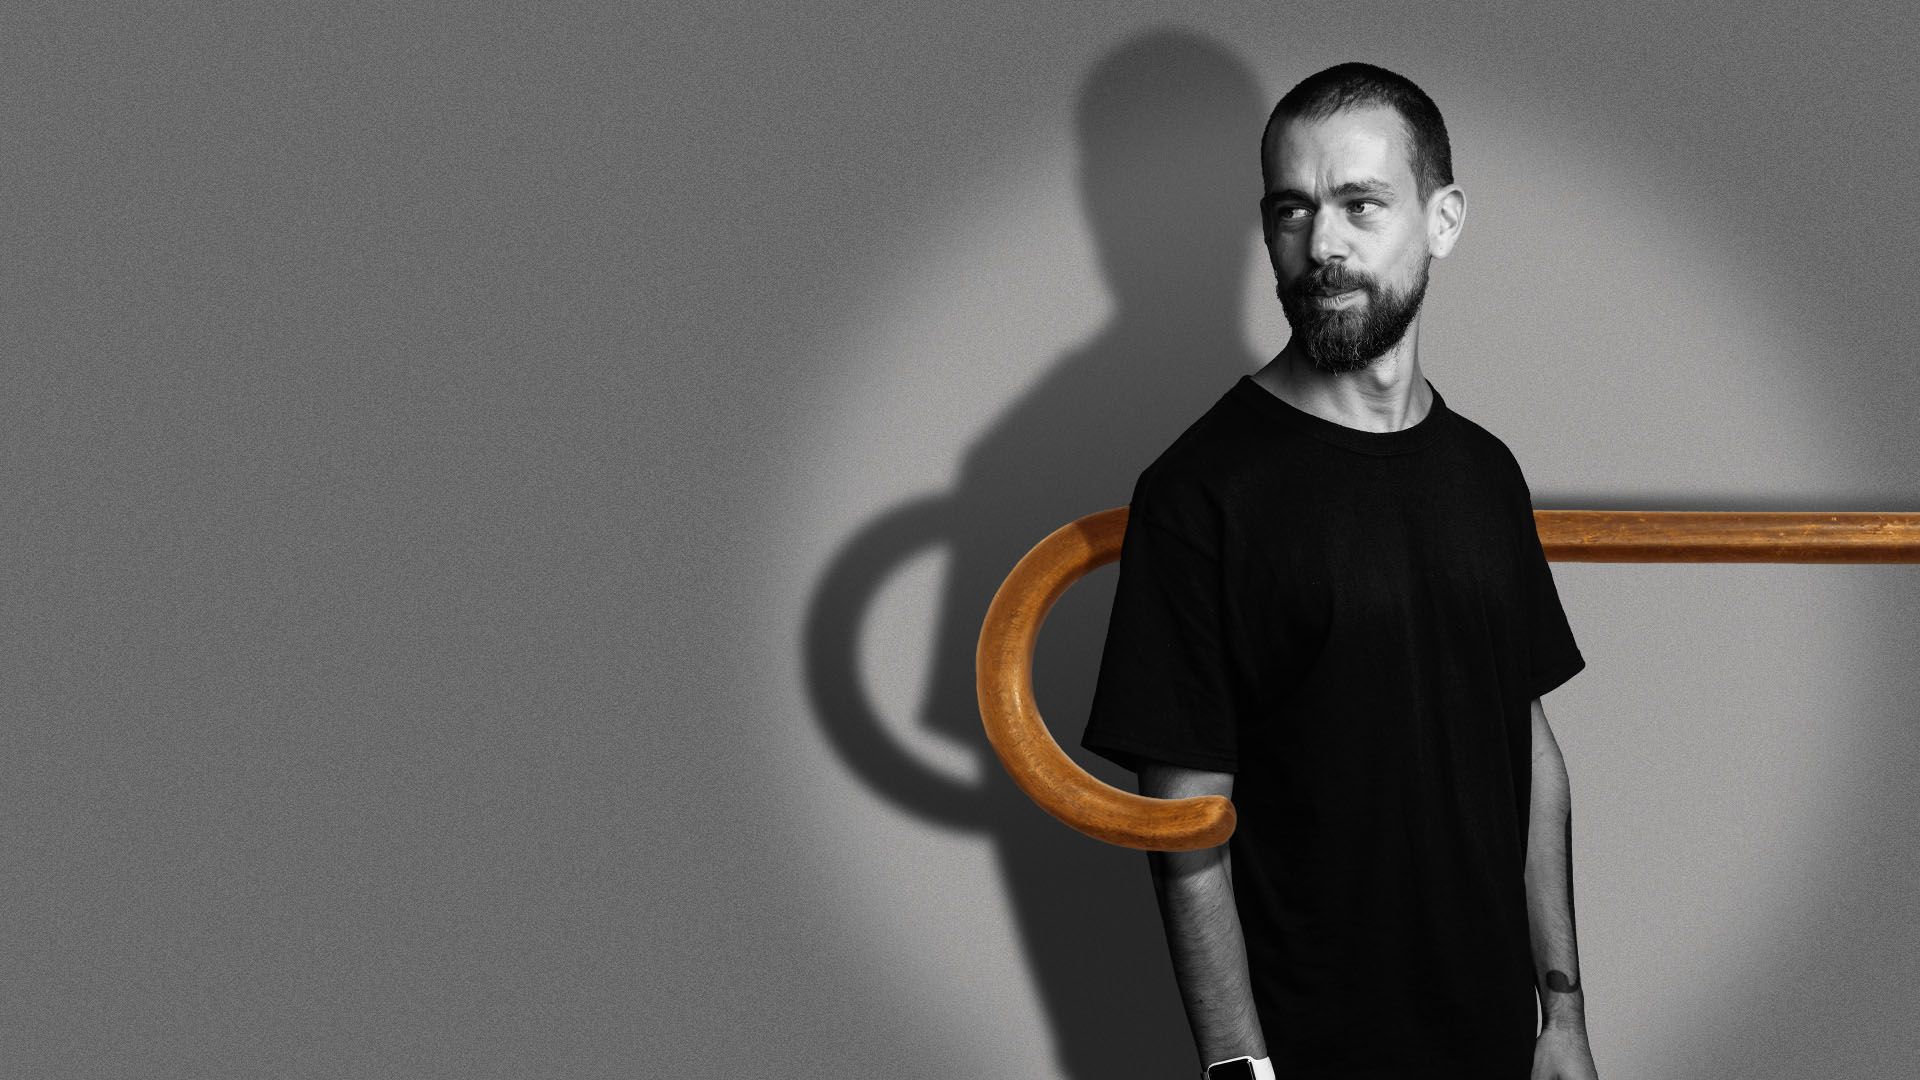 Photo illustration of Jack Dorsey about to be pulled out of frame by a big cane.